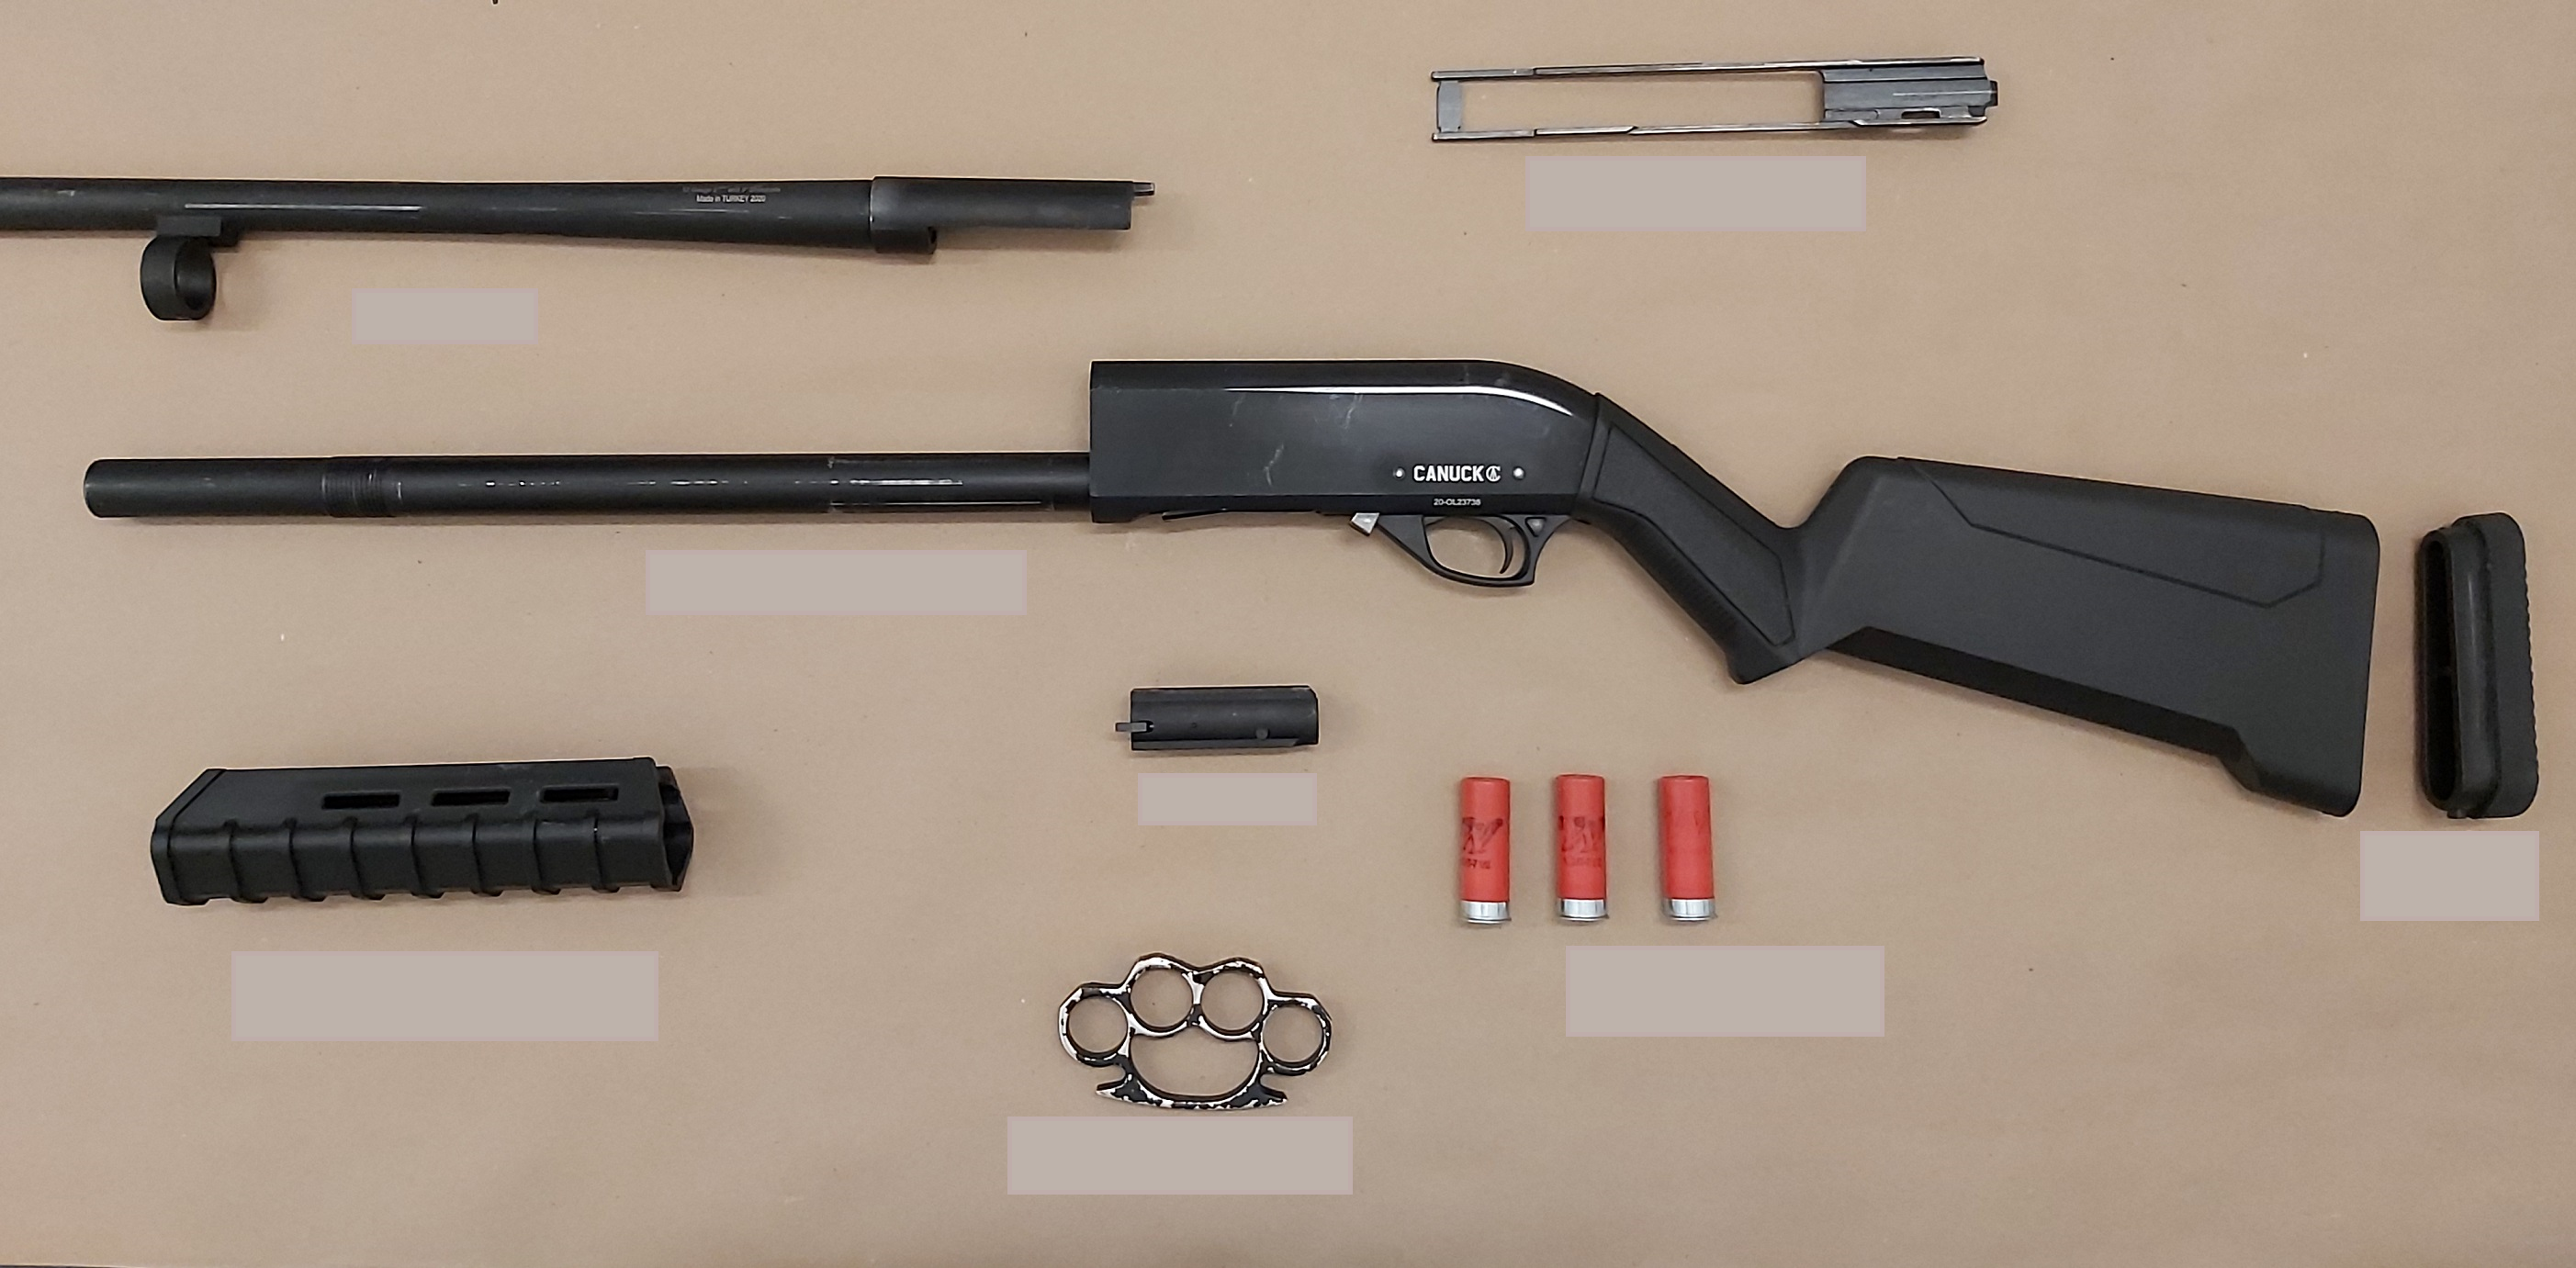 Man Charged for Possessing a Shotgun on SkyTrain